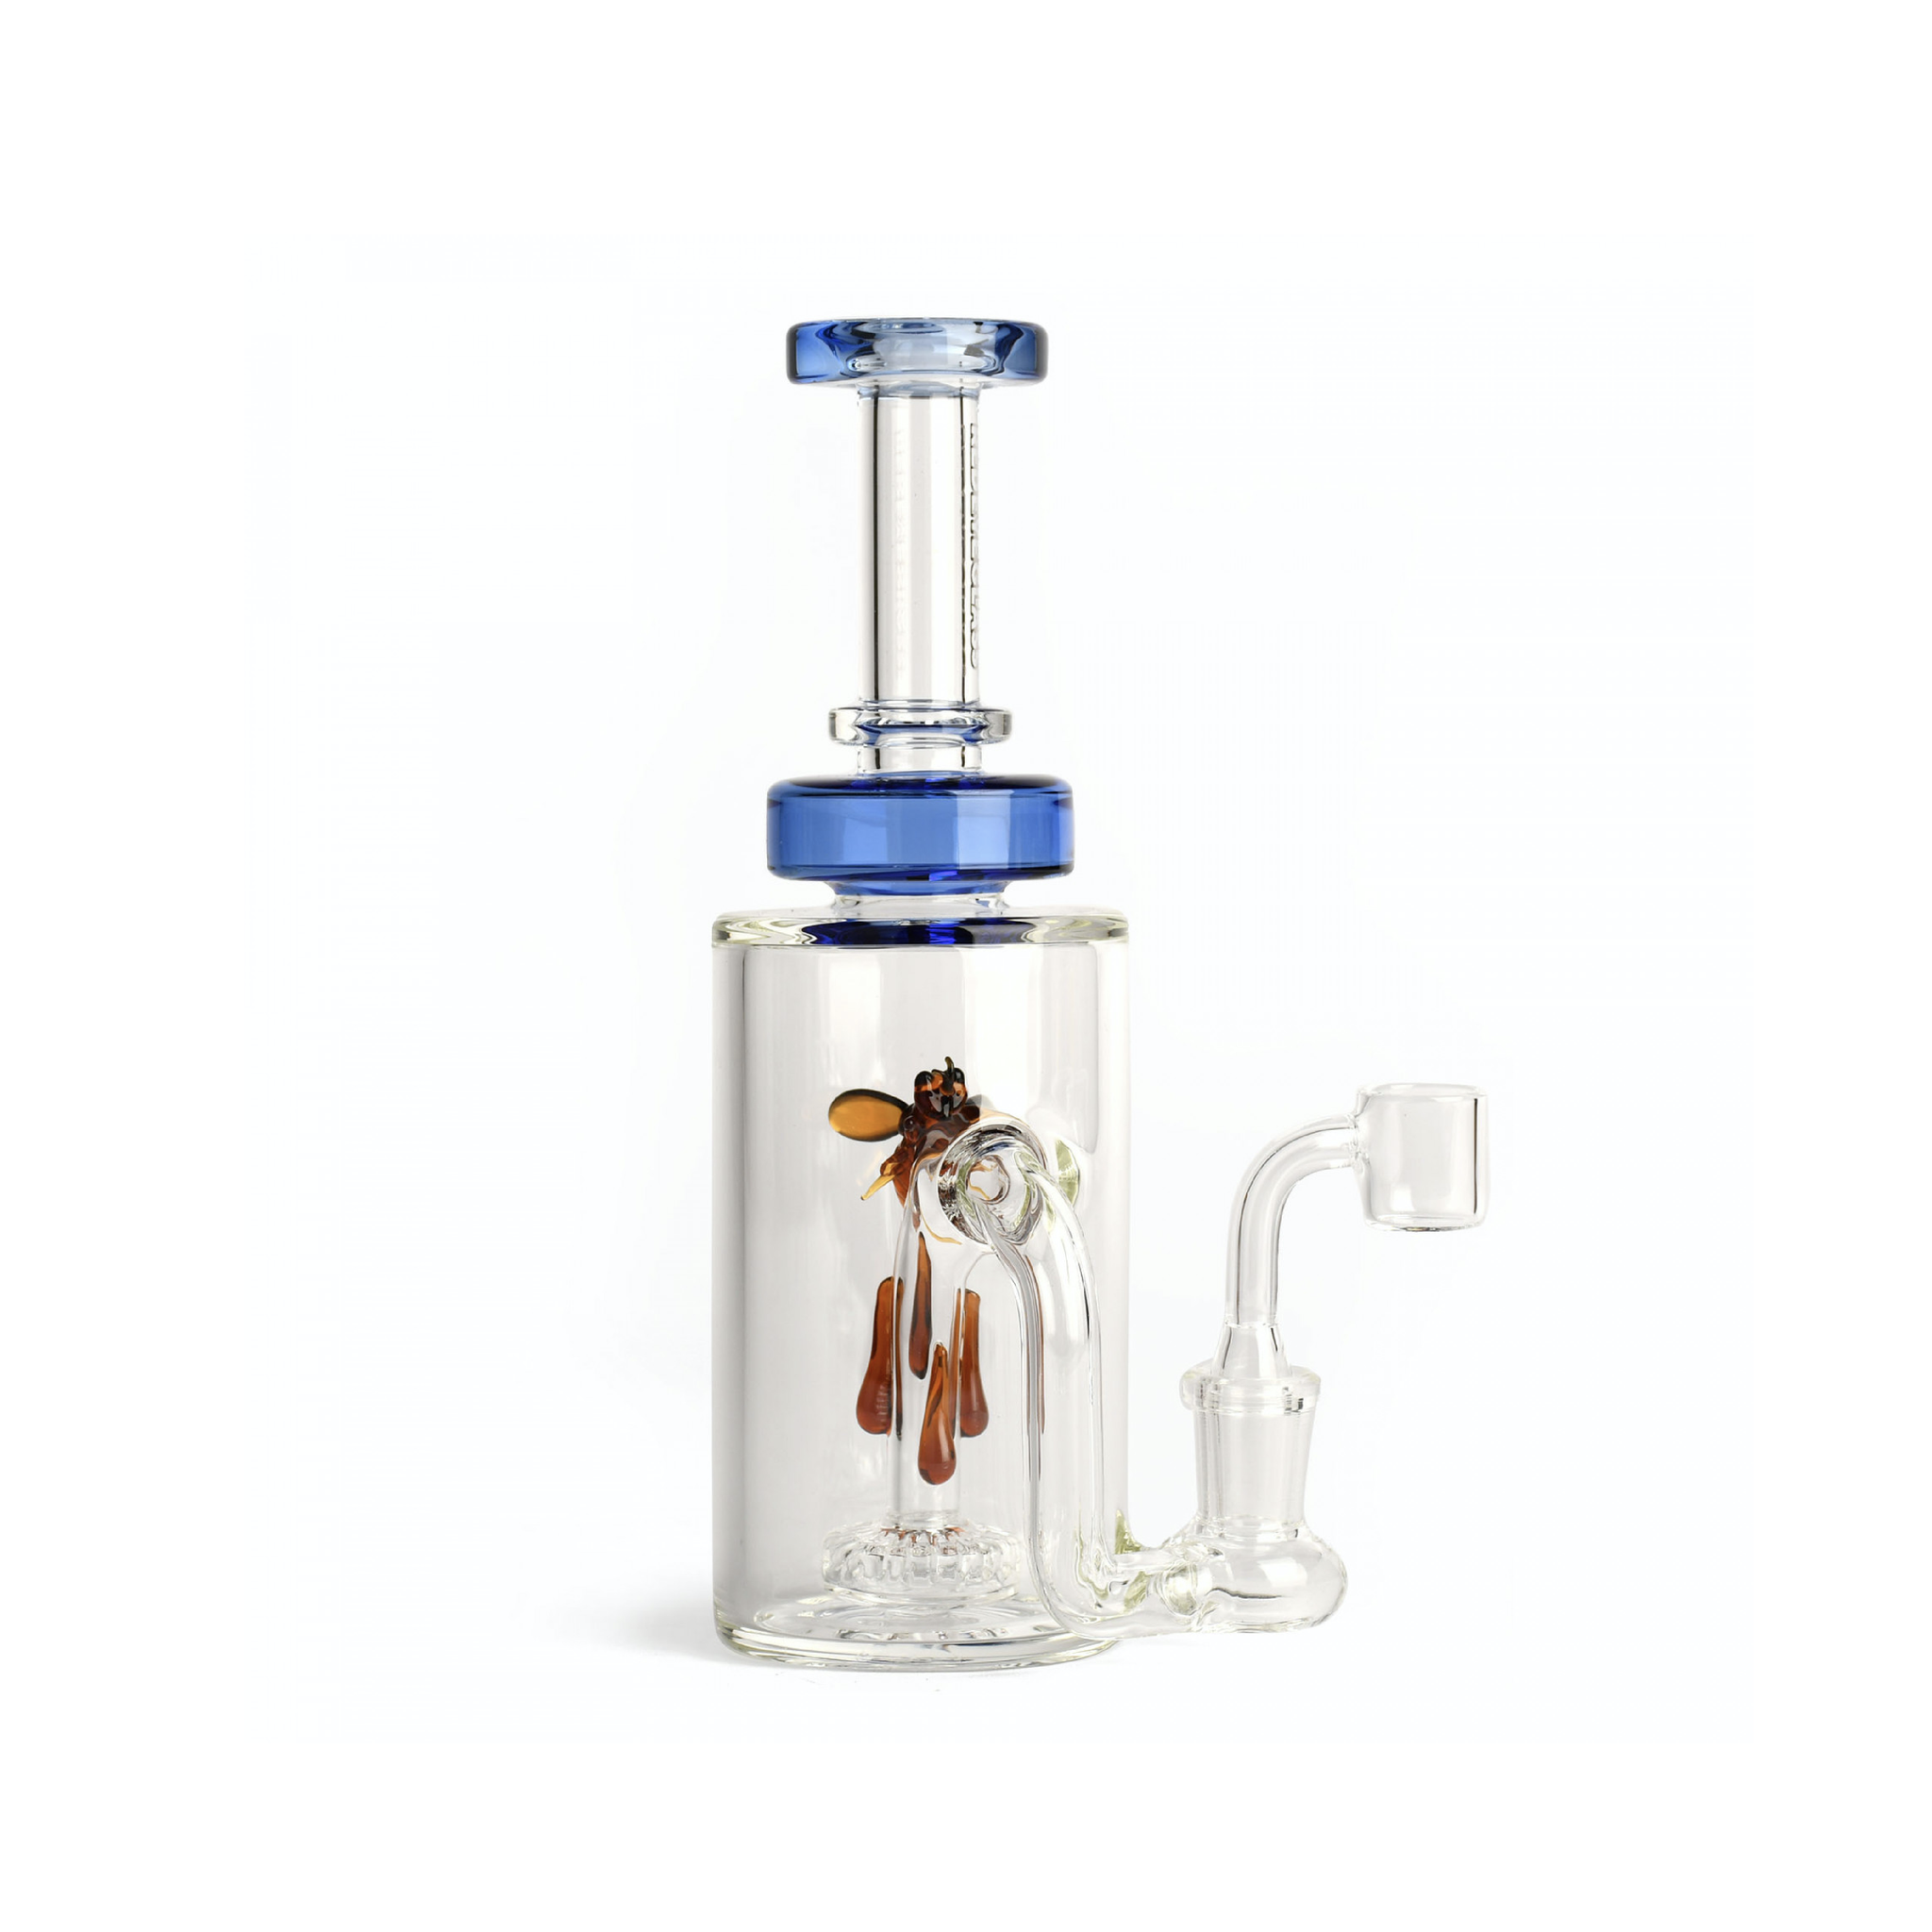 Apiary Concentrate Rig